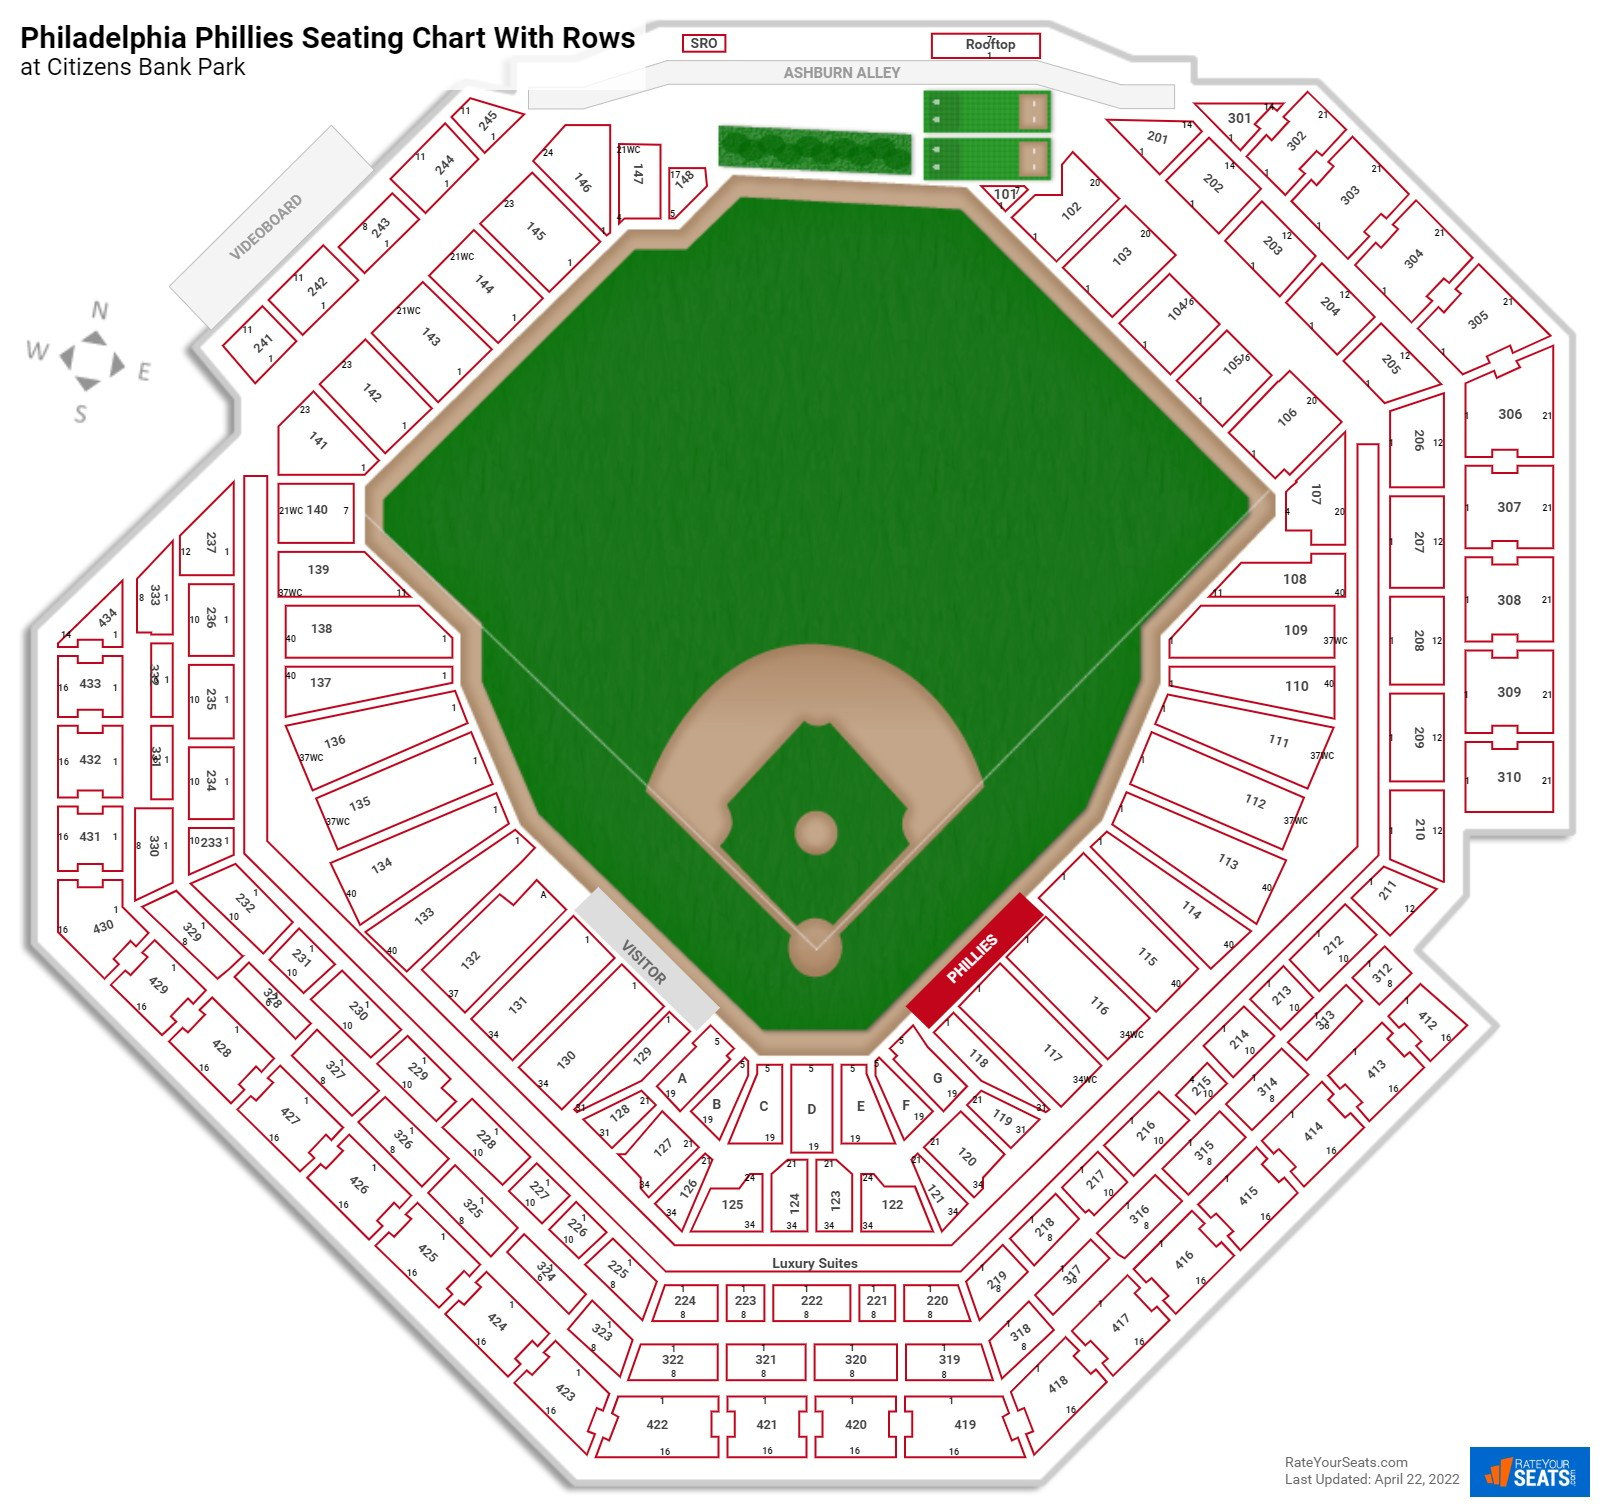 Philadelphia Phillies Seating Chart With Rows At Citizens Bank Park 